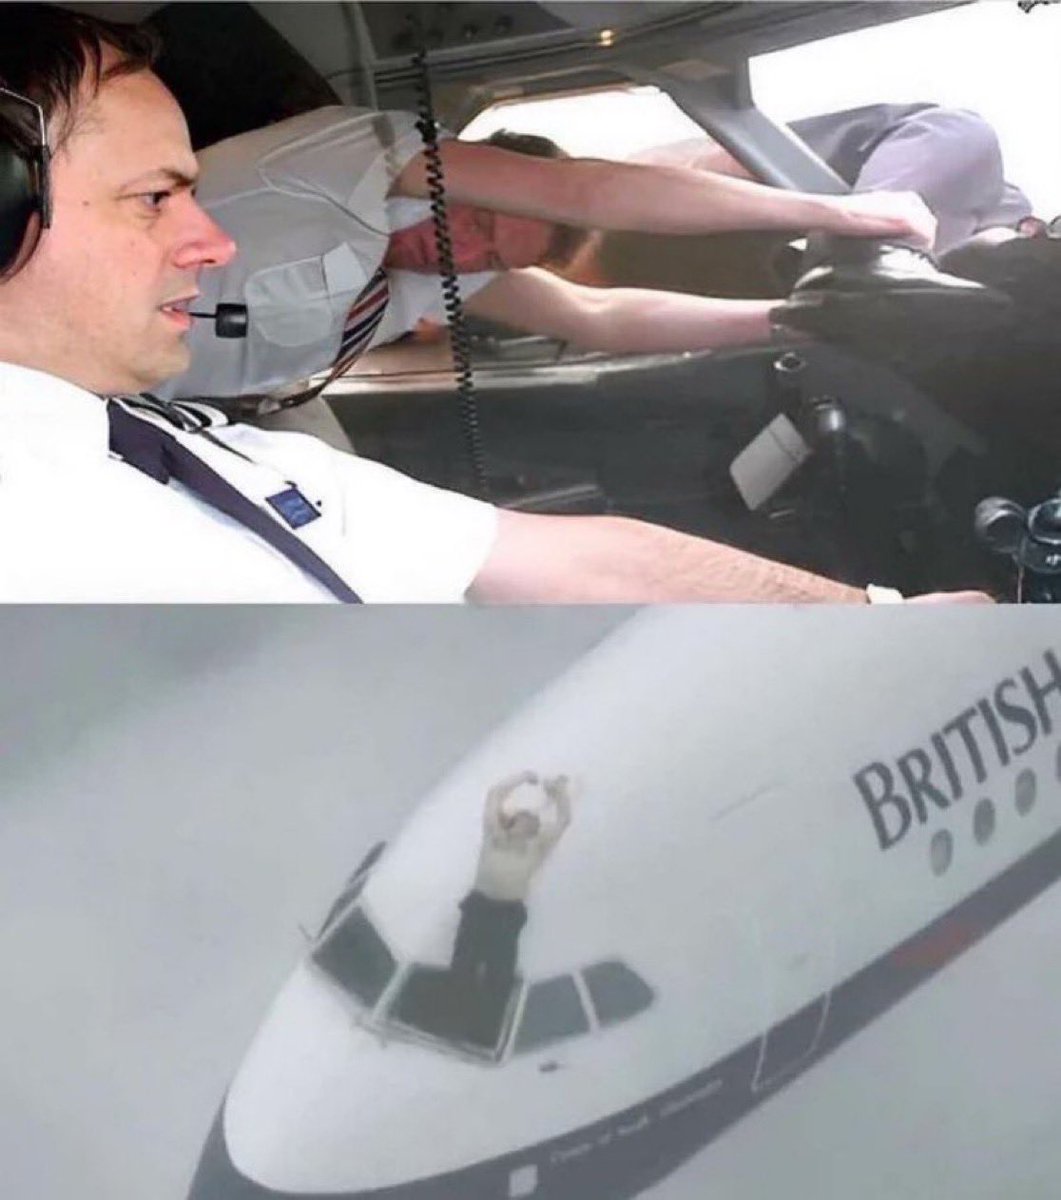 In 1990, the windshield of British Airways Flight 5390 detached at an altitude of 17,000 feet, causing a rapid decompression in the cockpit, which led to the captain being partially ejected from the aircraft. At the time of the incident, Nigel Ogden, a flight attendant, was en